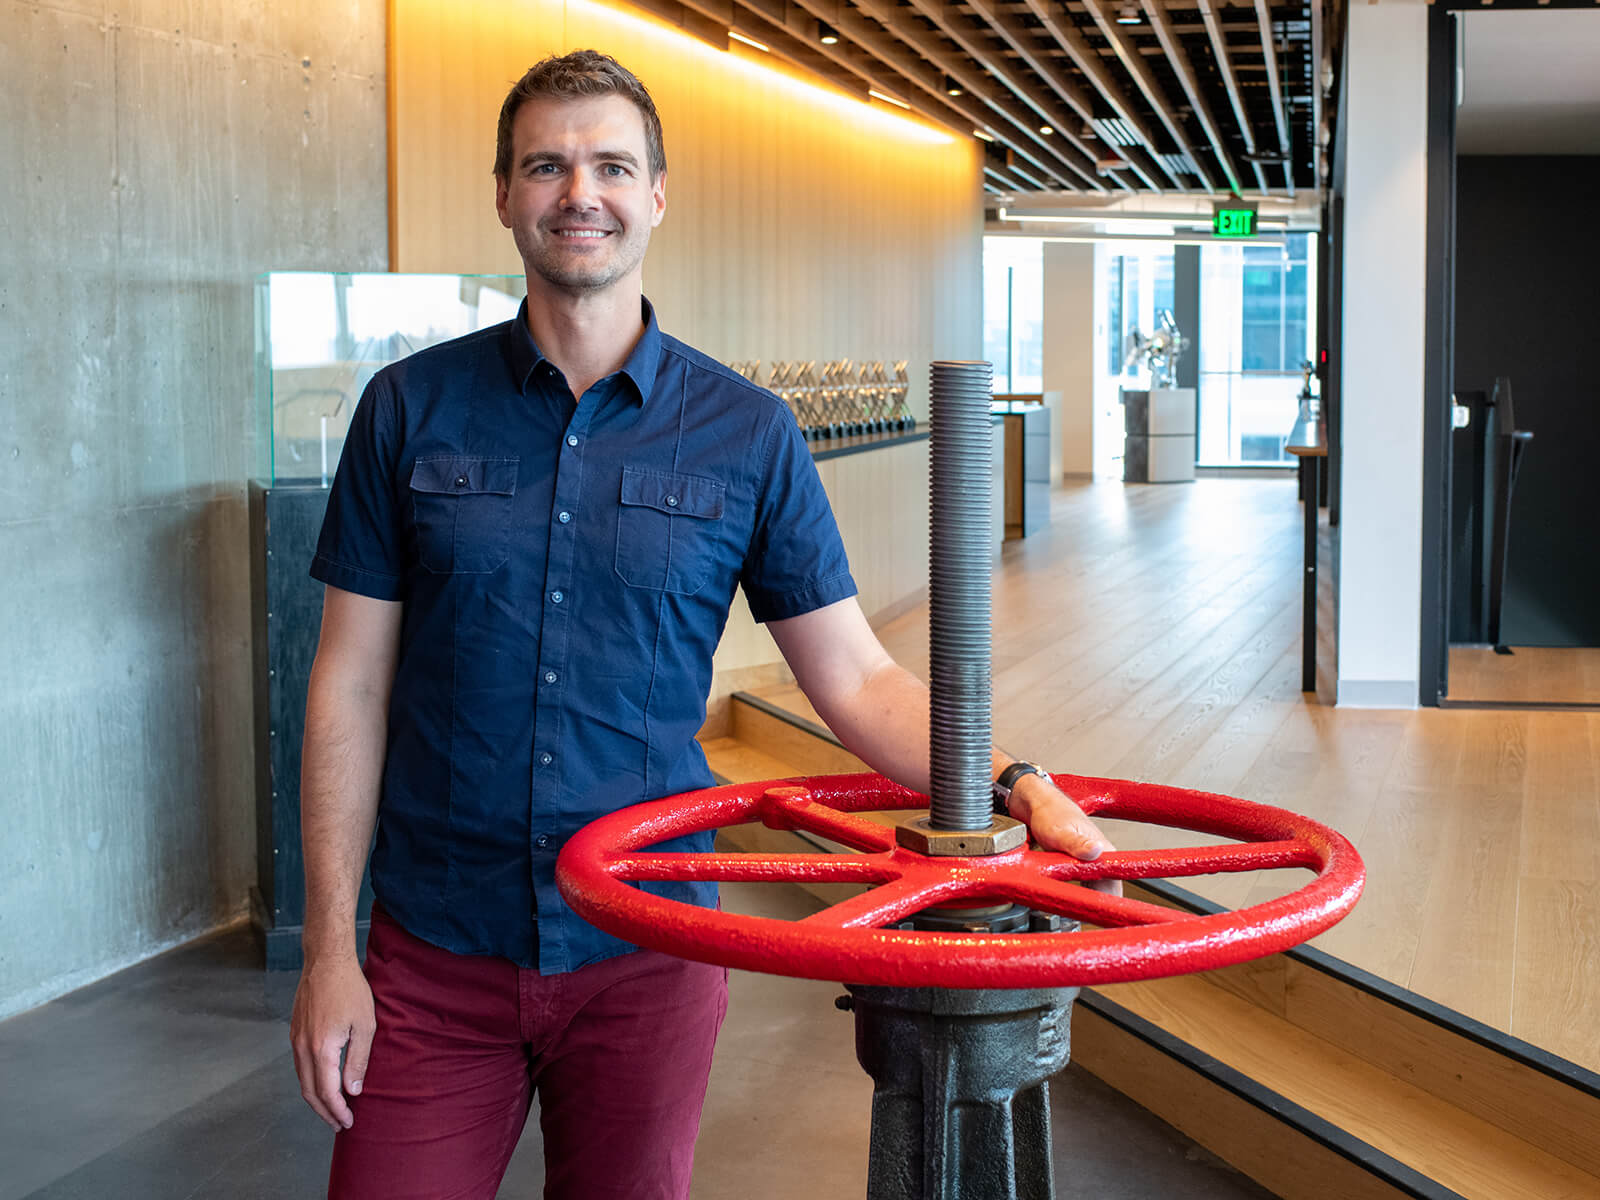 Kerry Davis stands holding the famous red steam valve at the Valve headquarters.